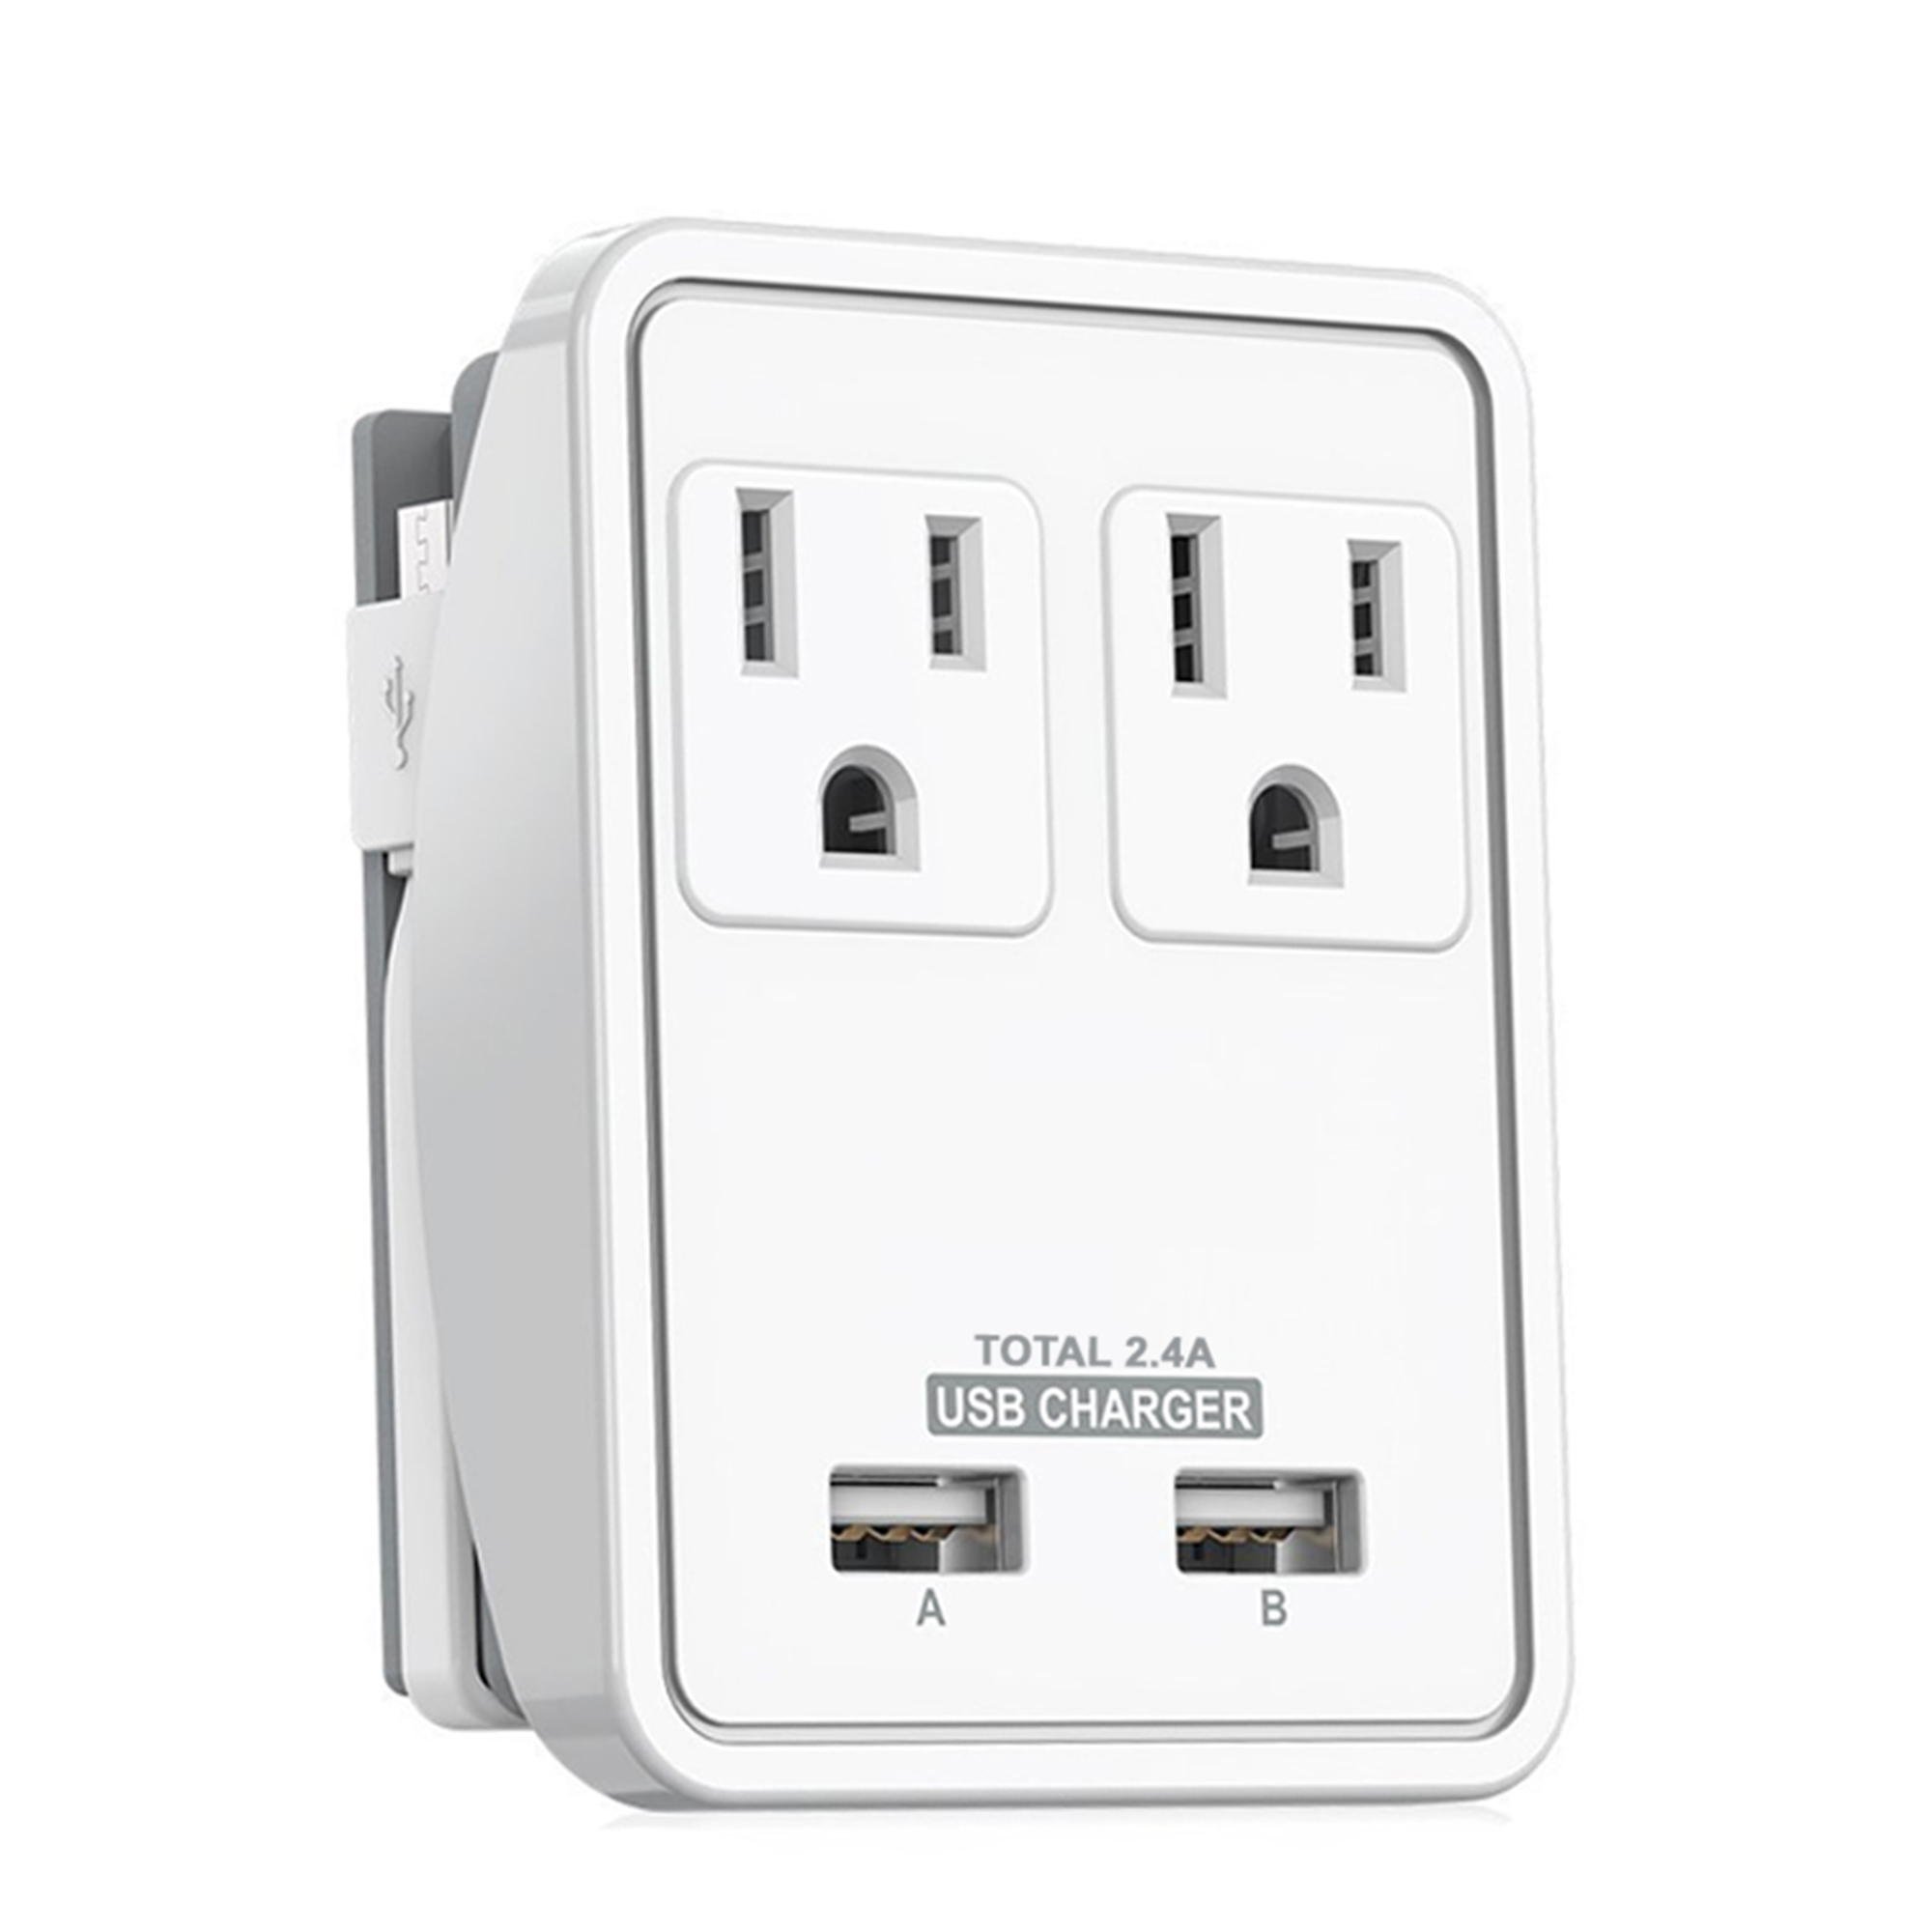 Uninex Compact Travel Wall Charger with 2-Outlet, 2.4A 2-USB, Foldable Plug, Built-in Micro USB Cable, UL Listed - image 1 of 6